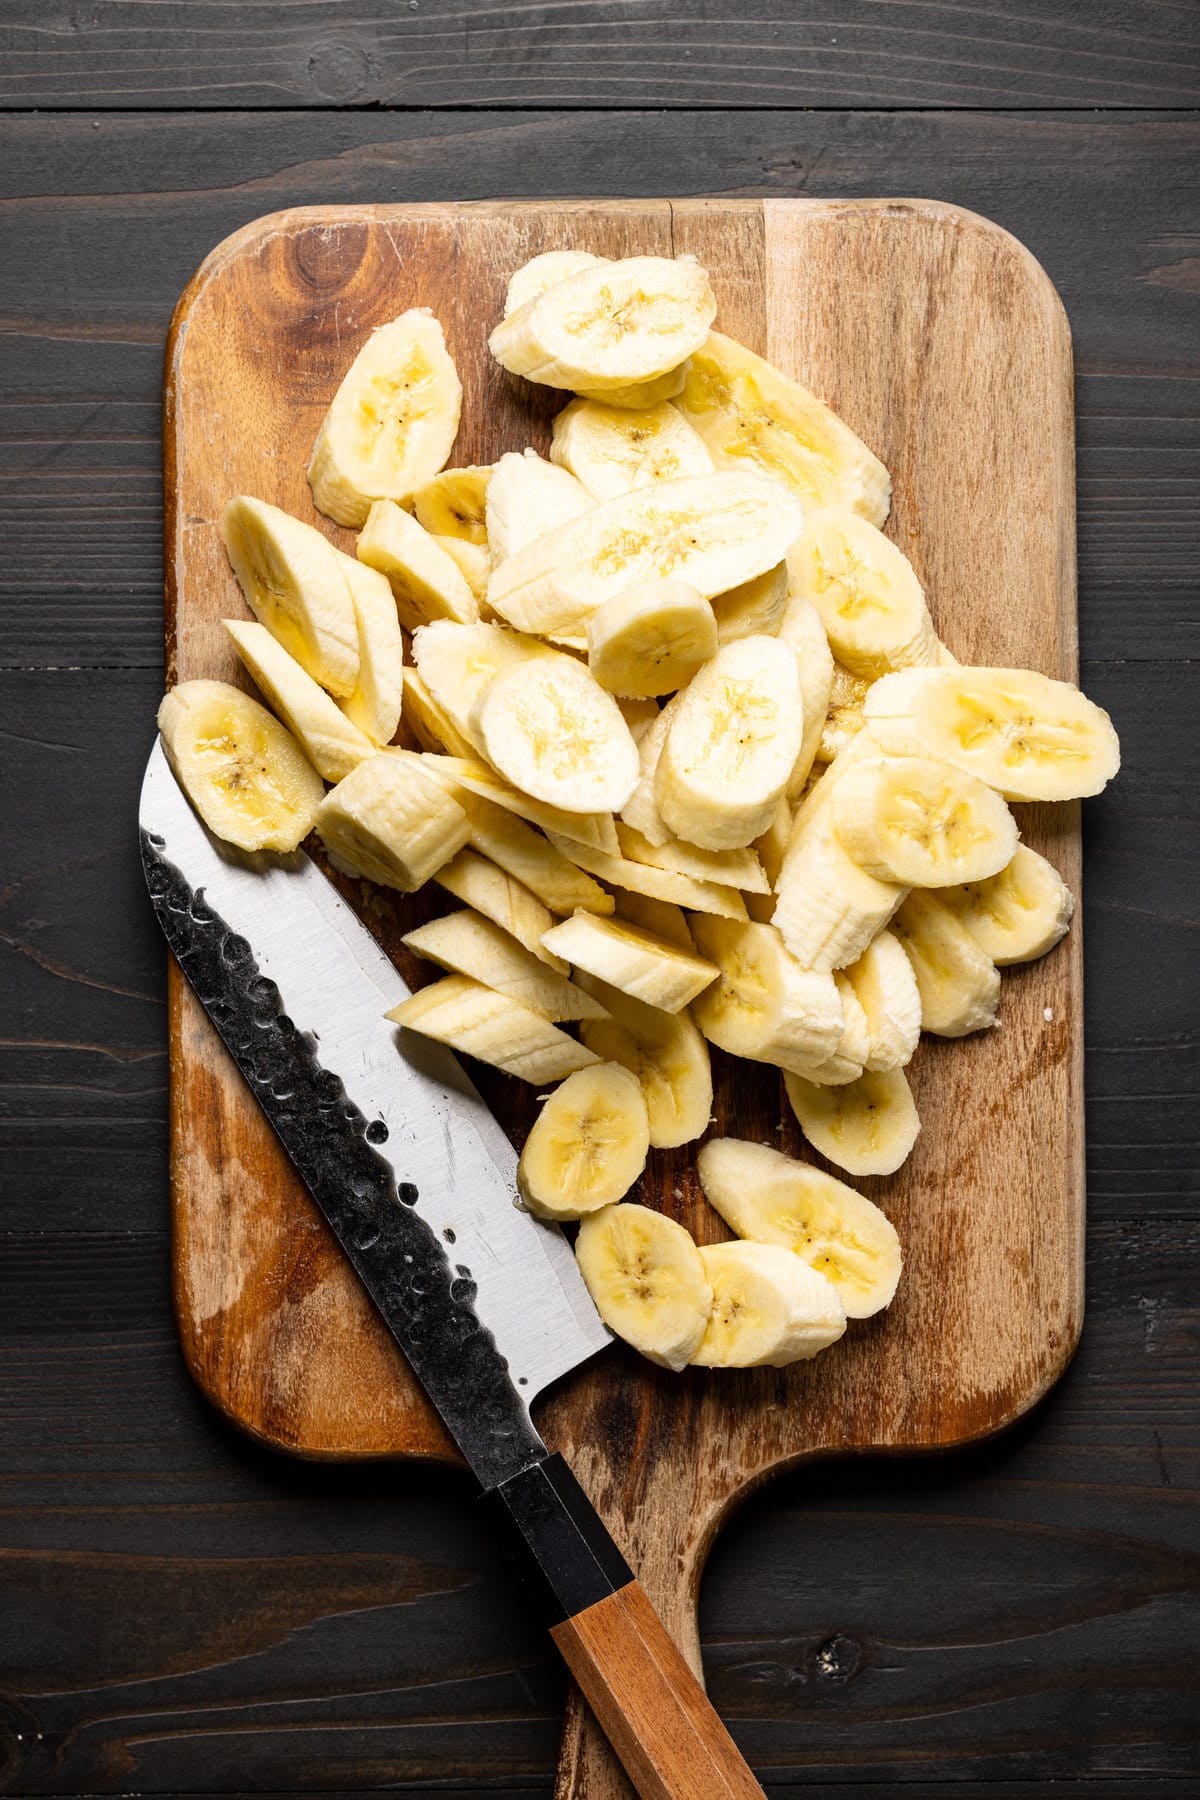 Sliced bananas on a cutting board with a knife